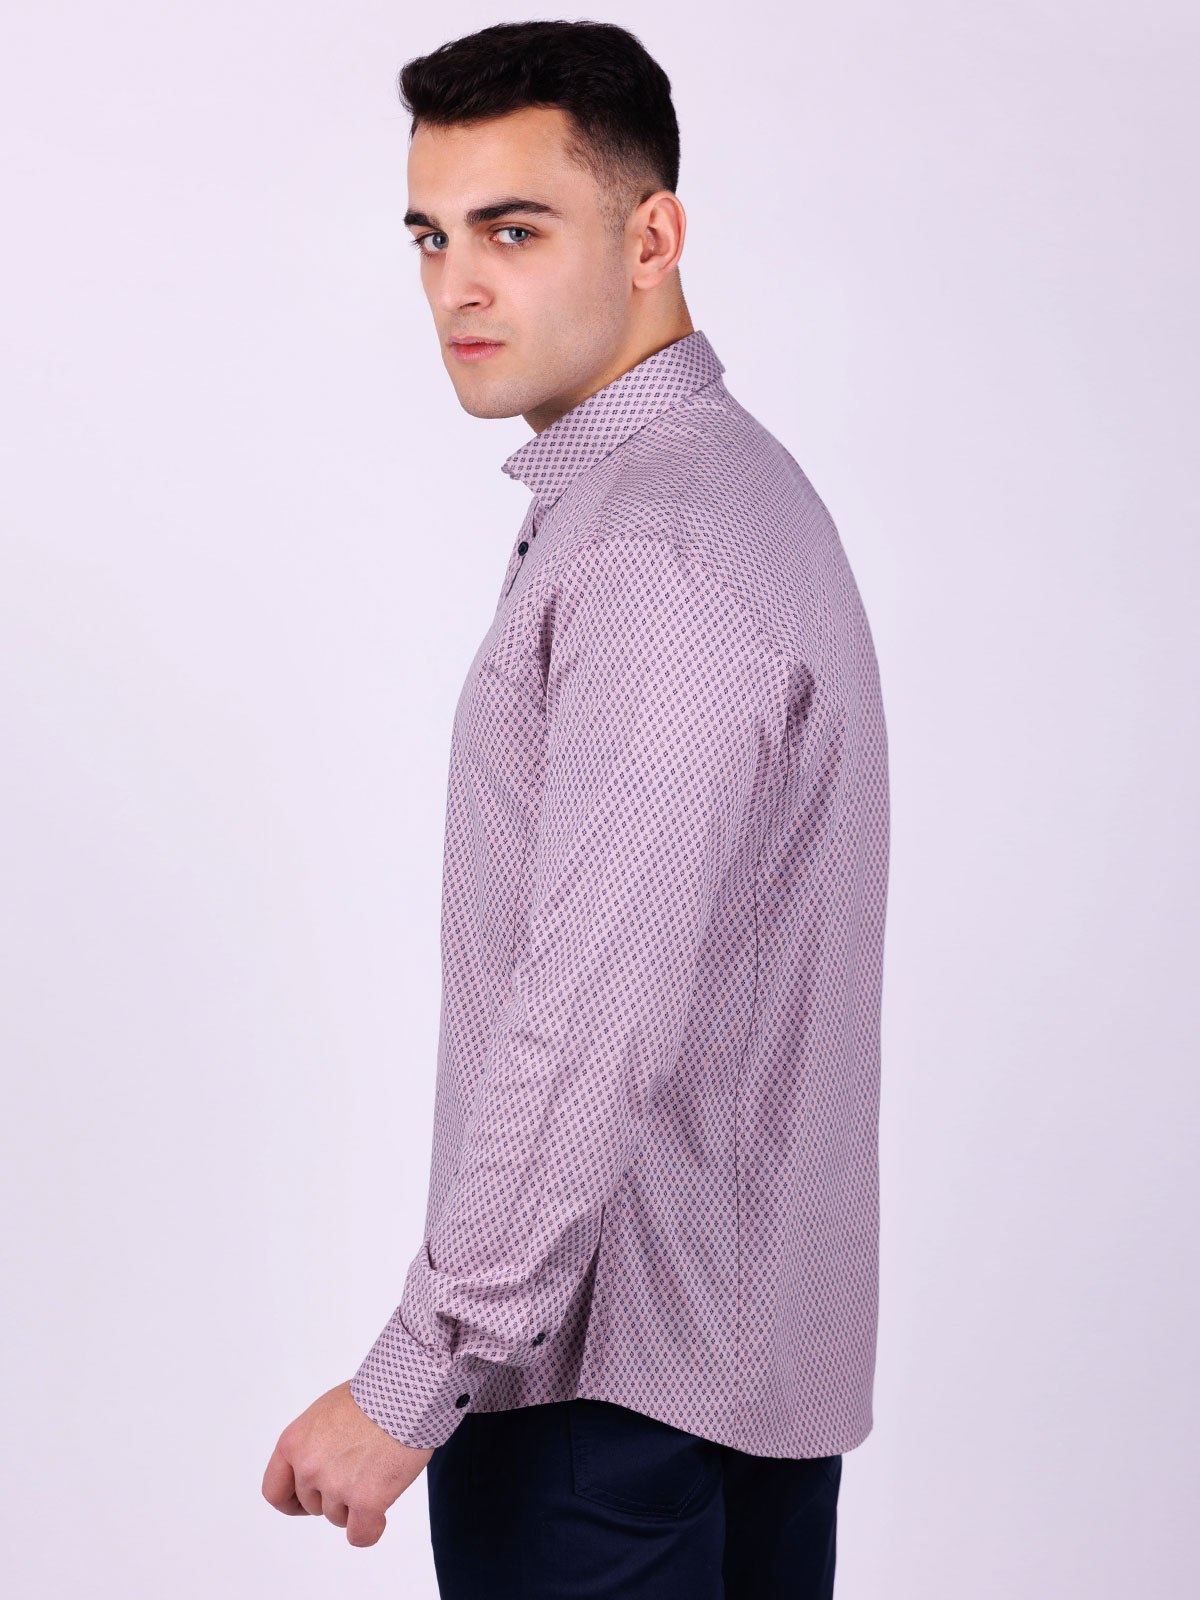 Shirt in light purple with figures - 21538 € 33.18 img2